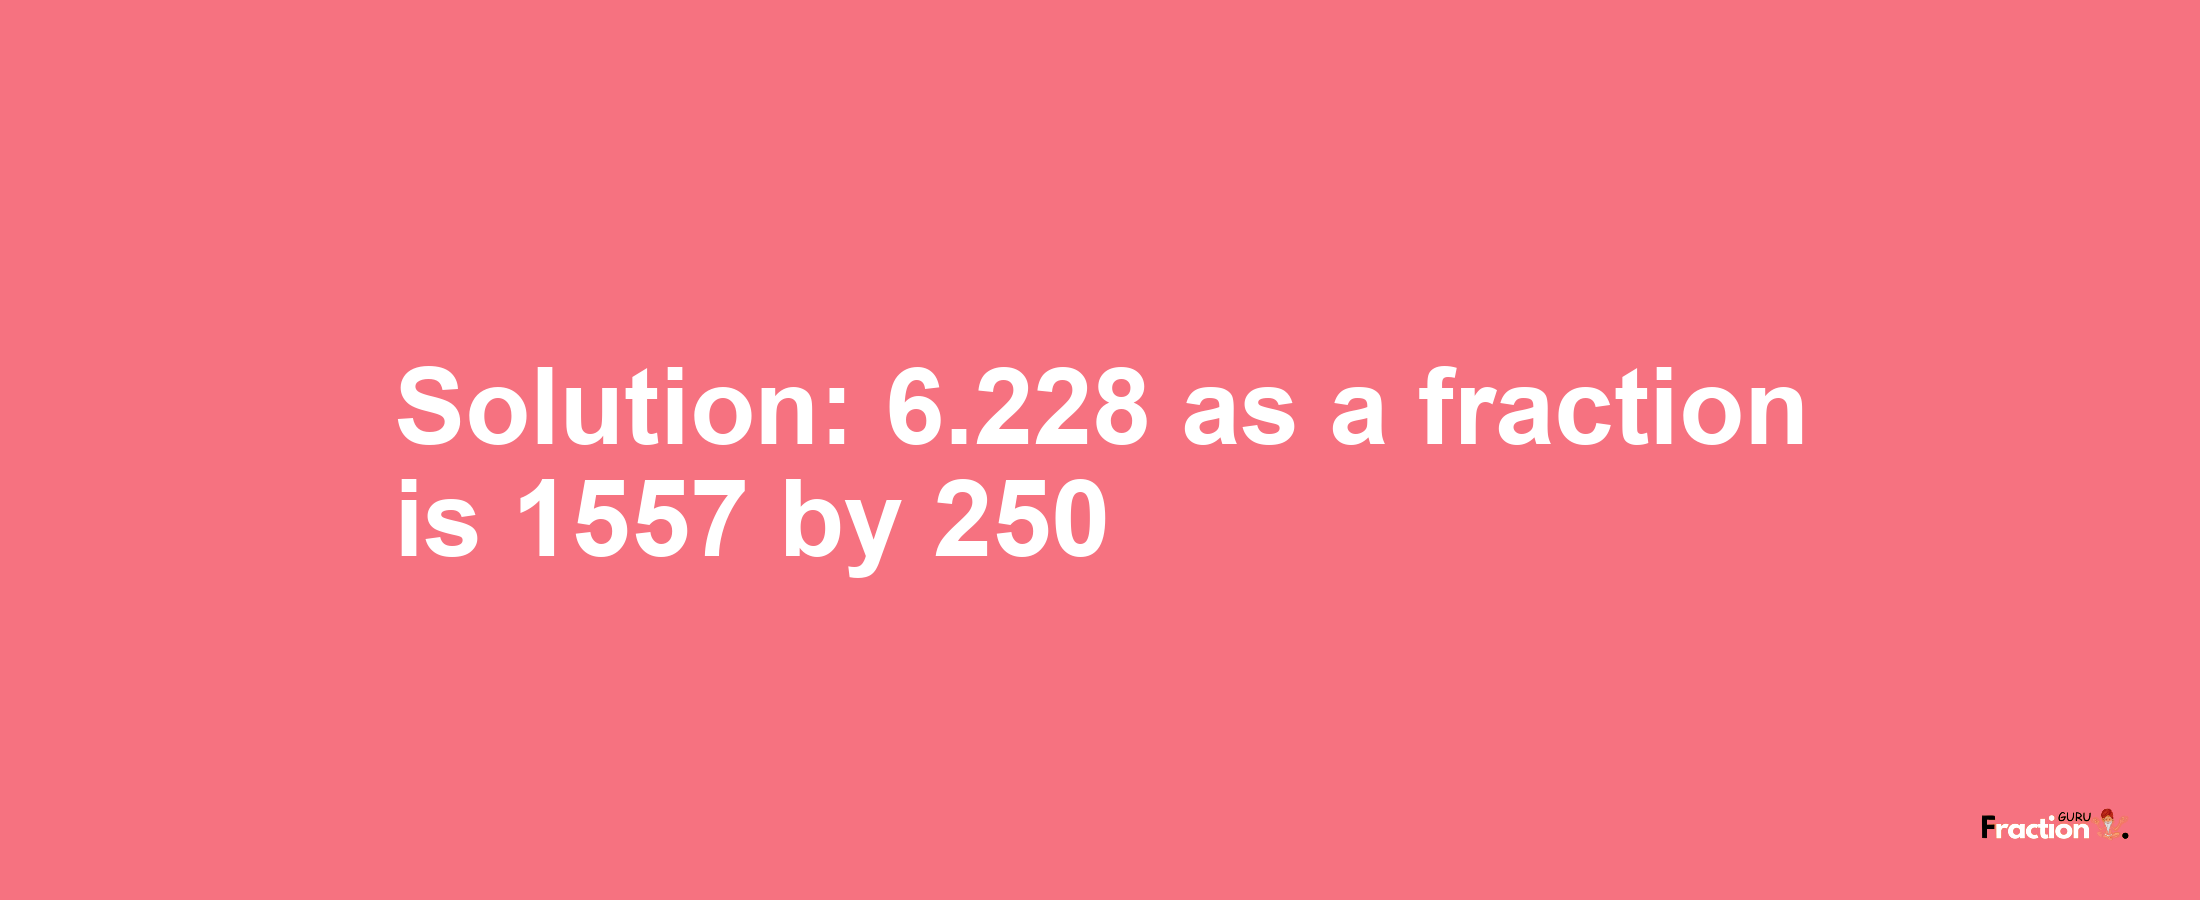 Solution:6.228 as a fraction is 1557/250